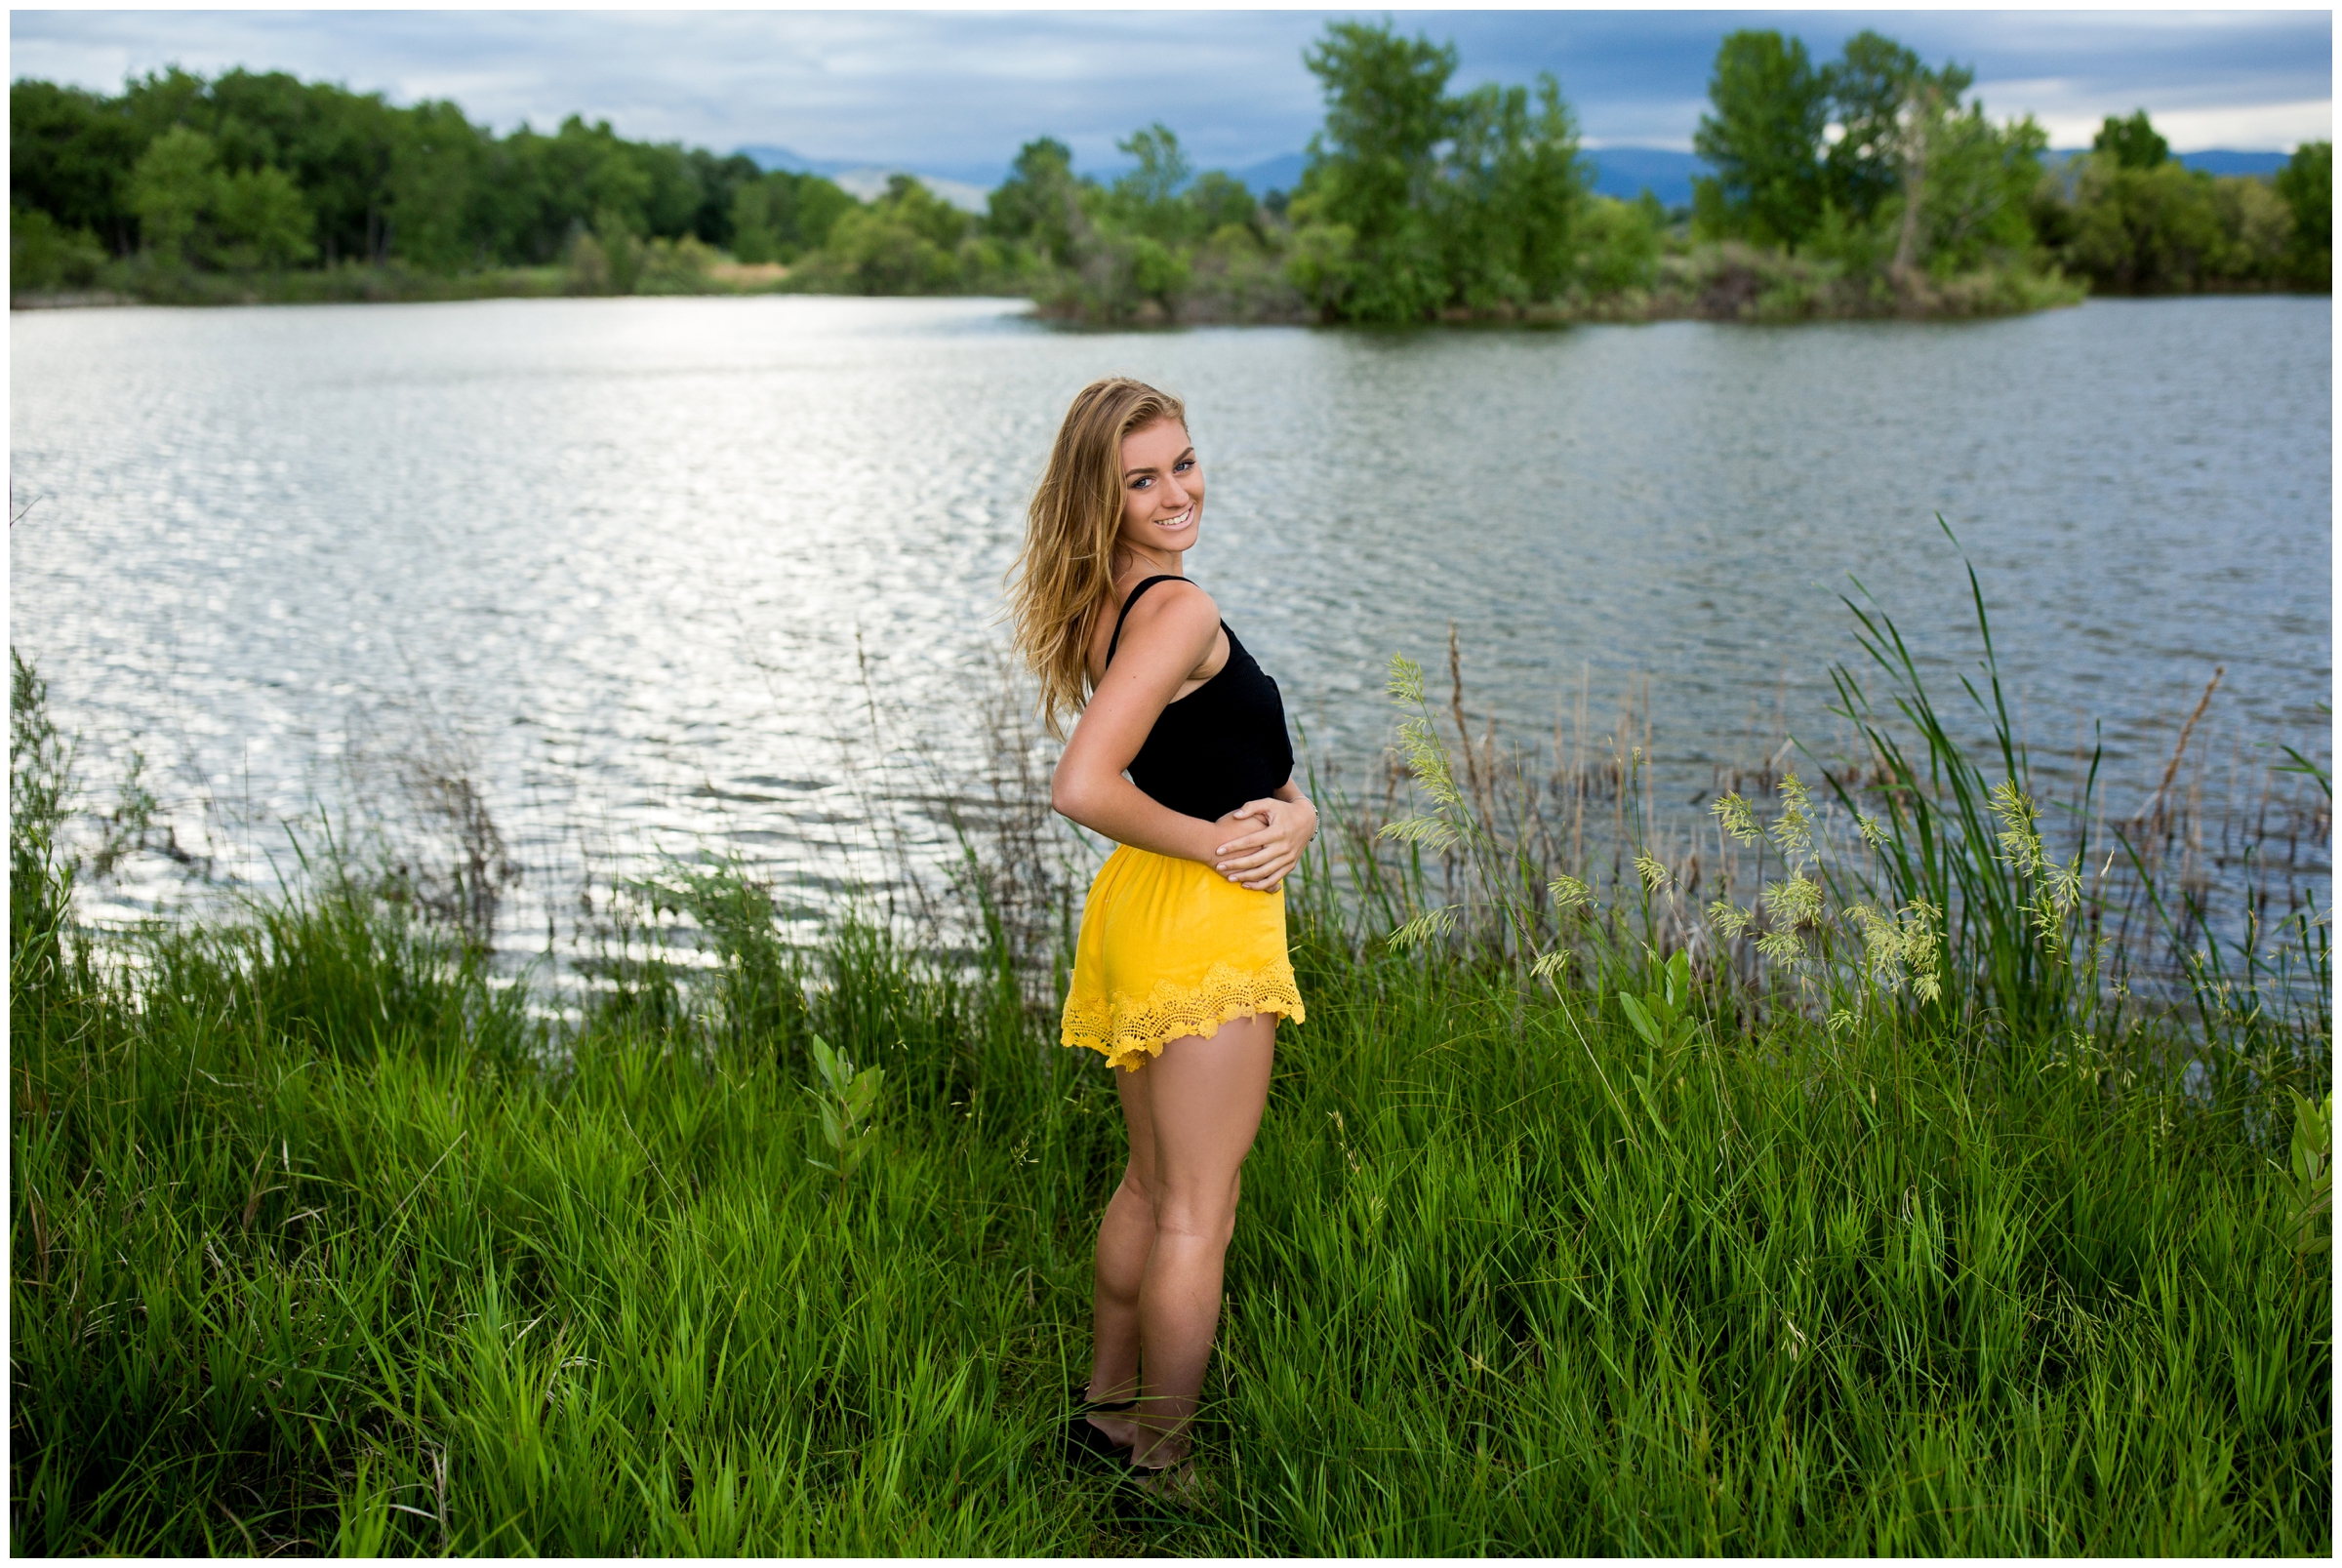 Frederick Colorado senior pictures at Golden Ponds by Longmont portrait photographer Plum Pretty Photography. Waterfall and lake senior photos inspiration. 